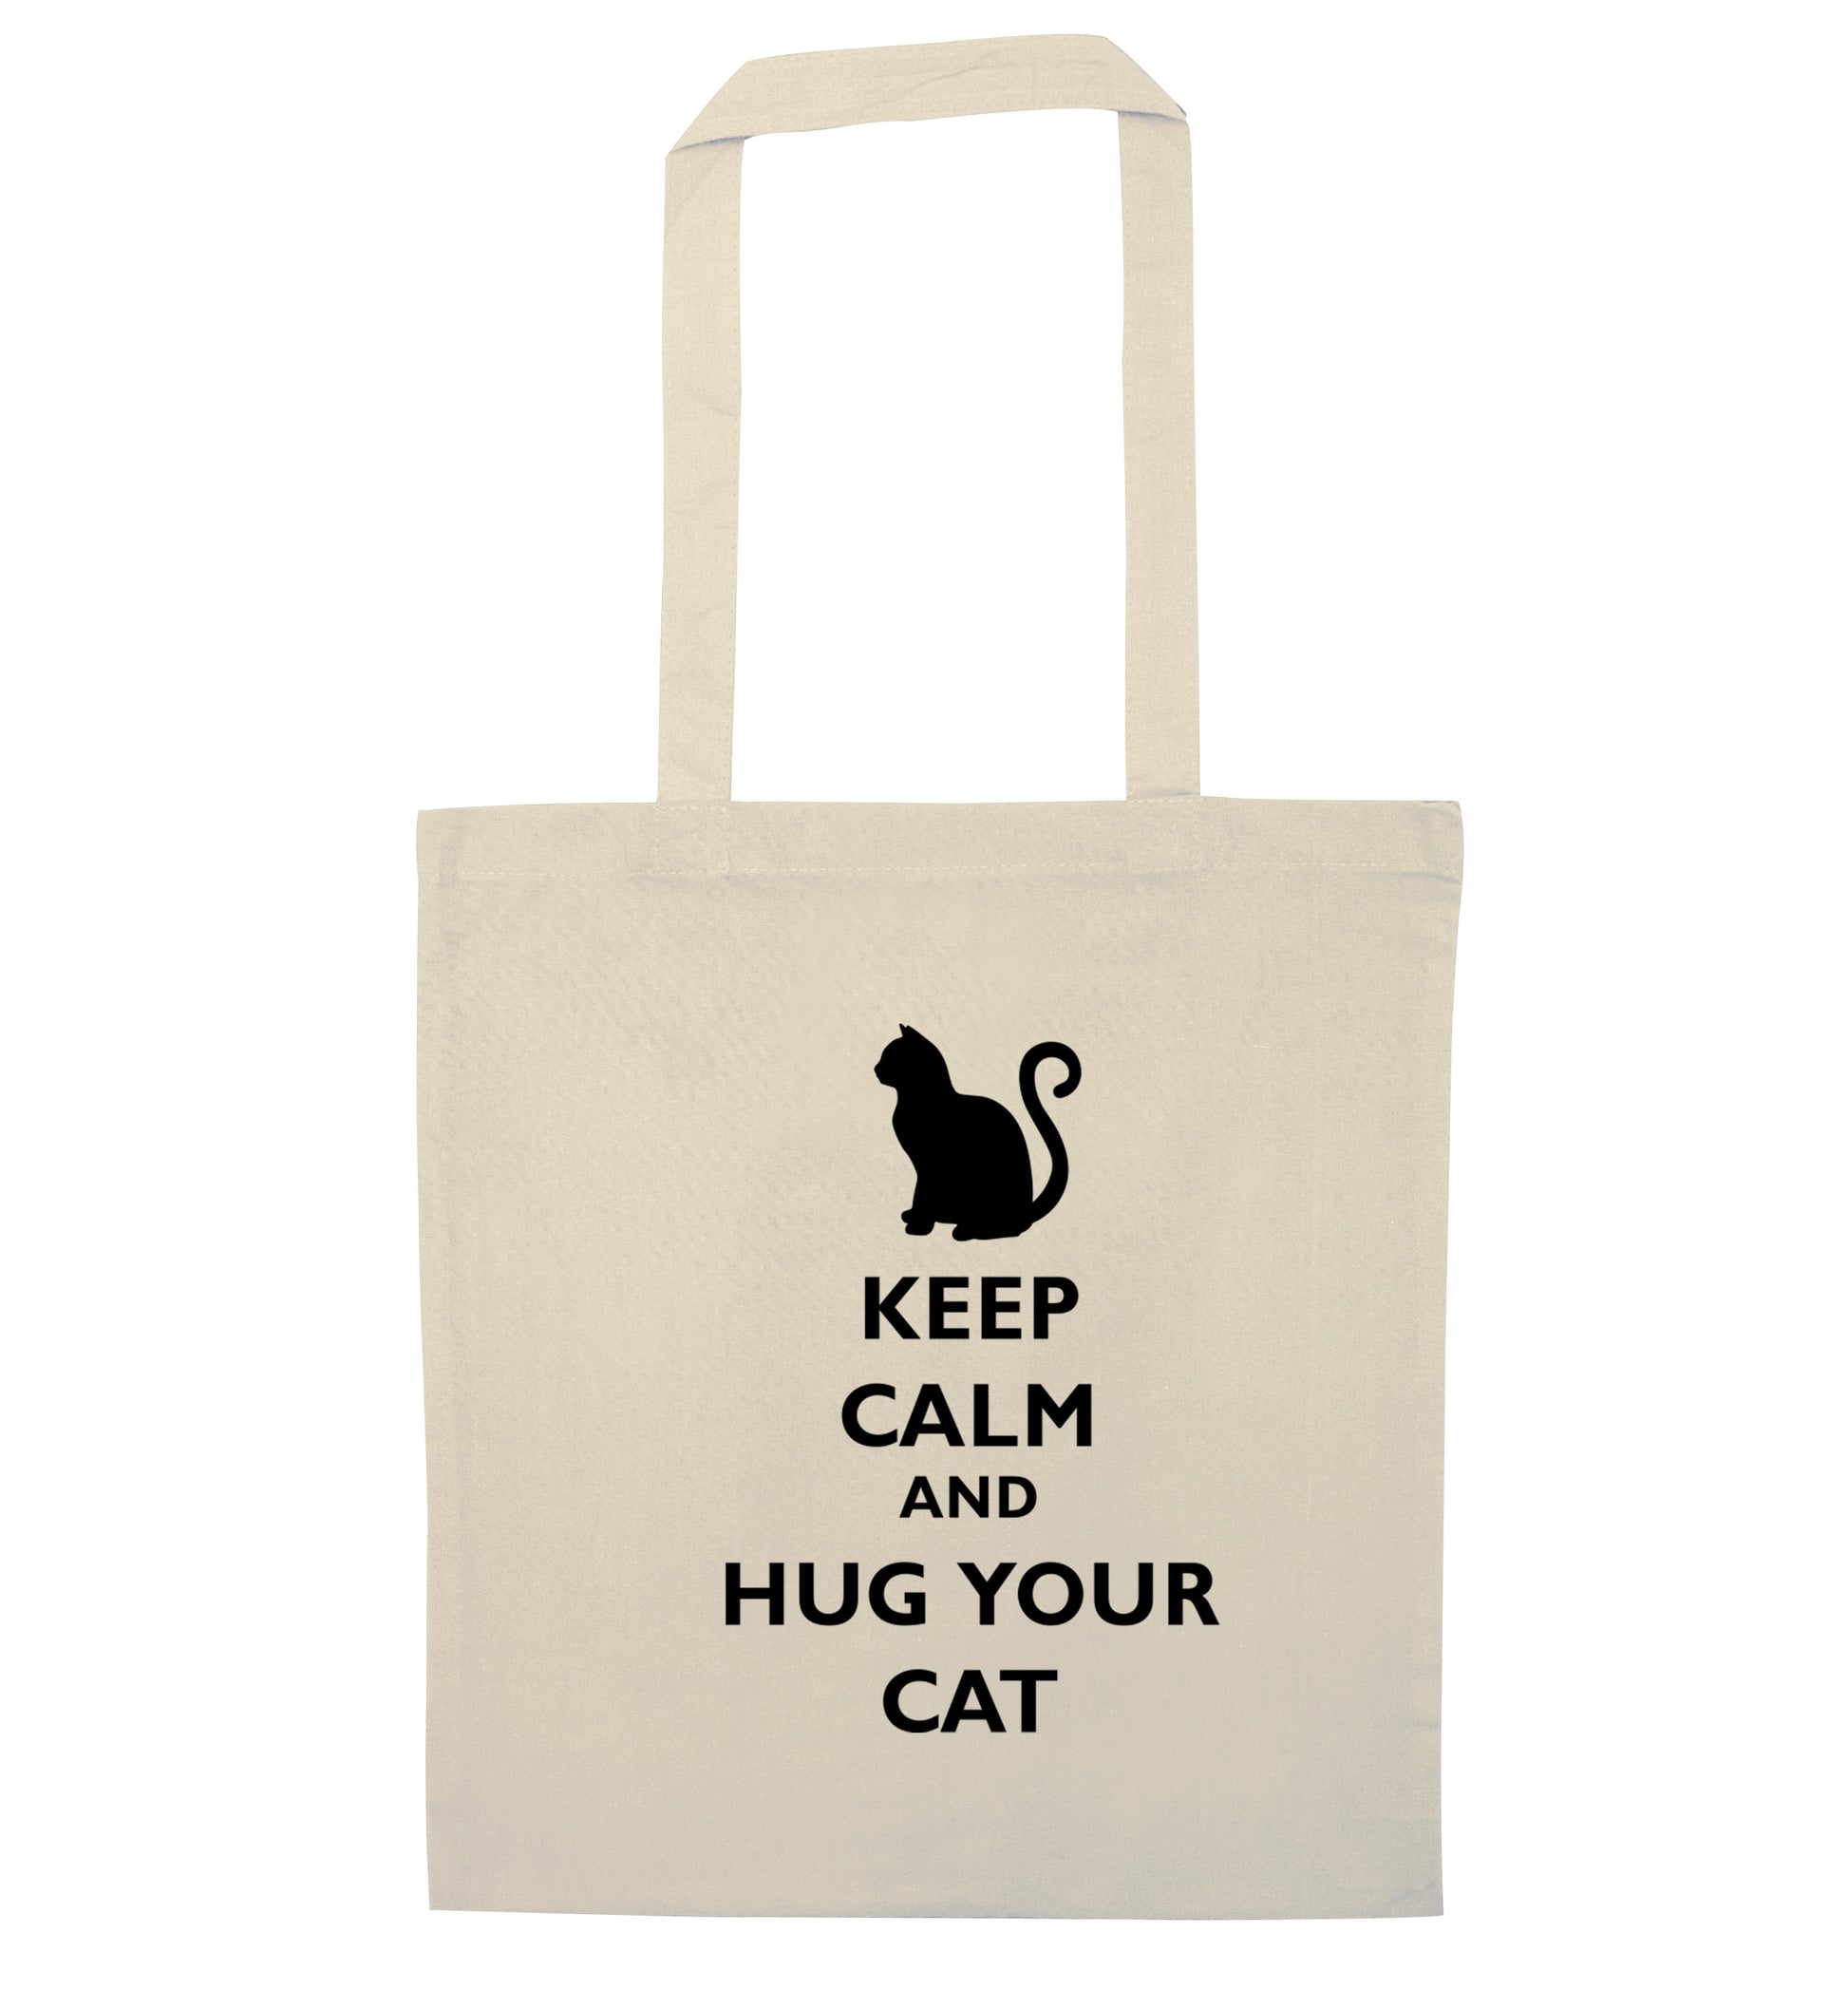 Keep calm and hug your cat natural tote bag